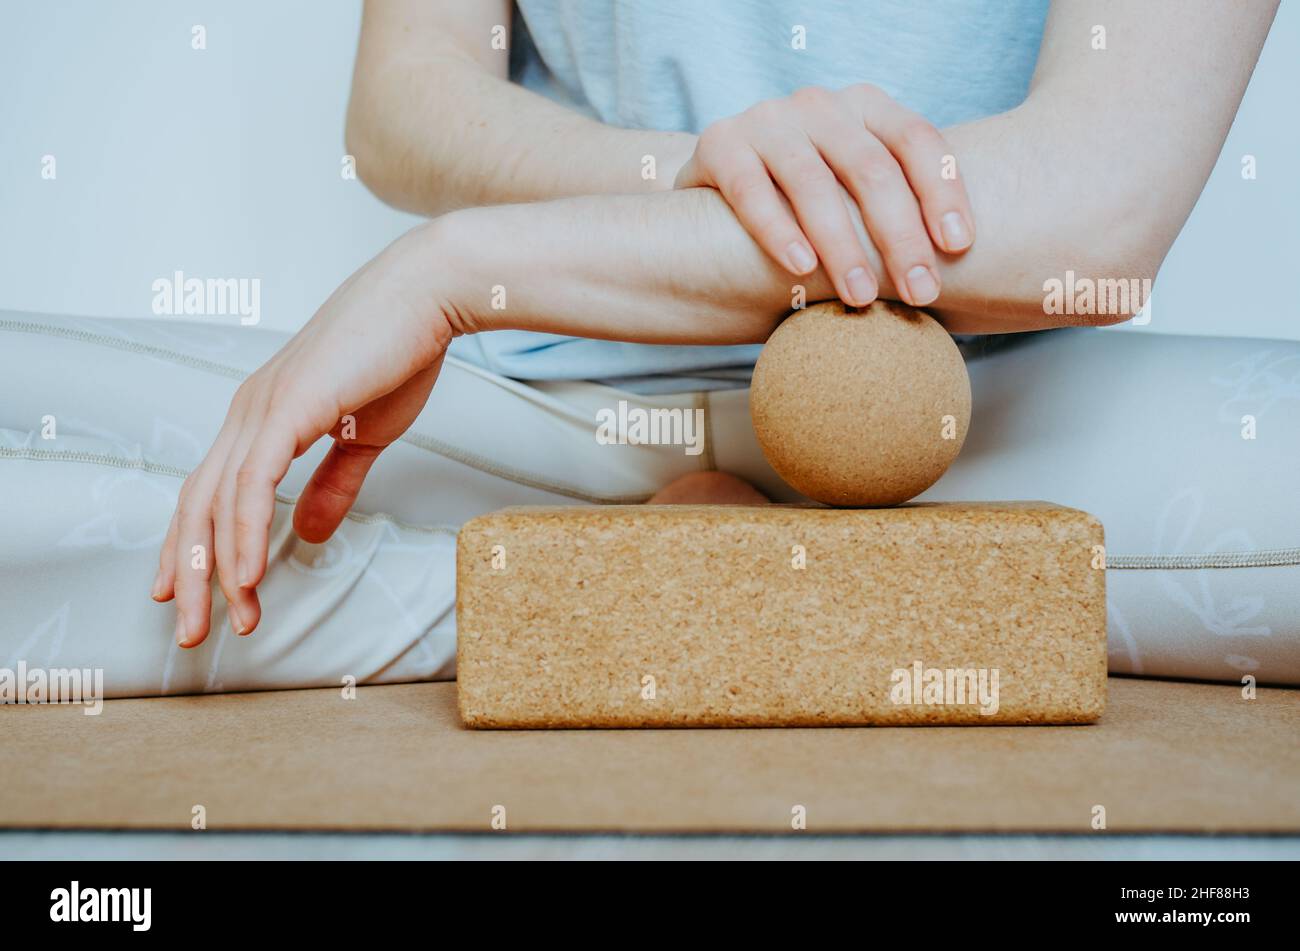 Forearm muscles myofascial release with massage ball on cork block.  Concept: self care practices at home, SMFR techniques Stock Photo - Alamy